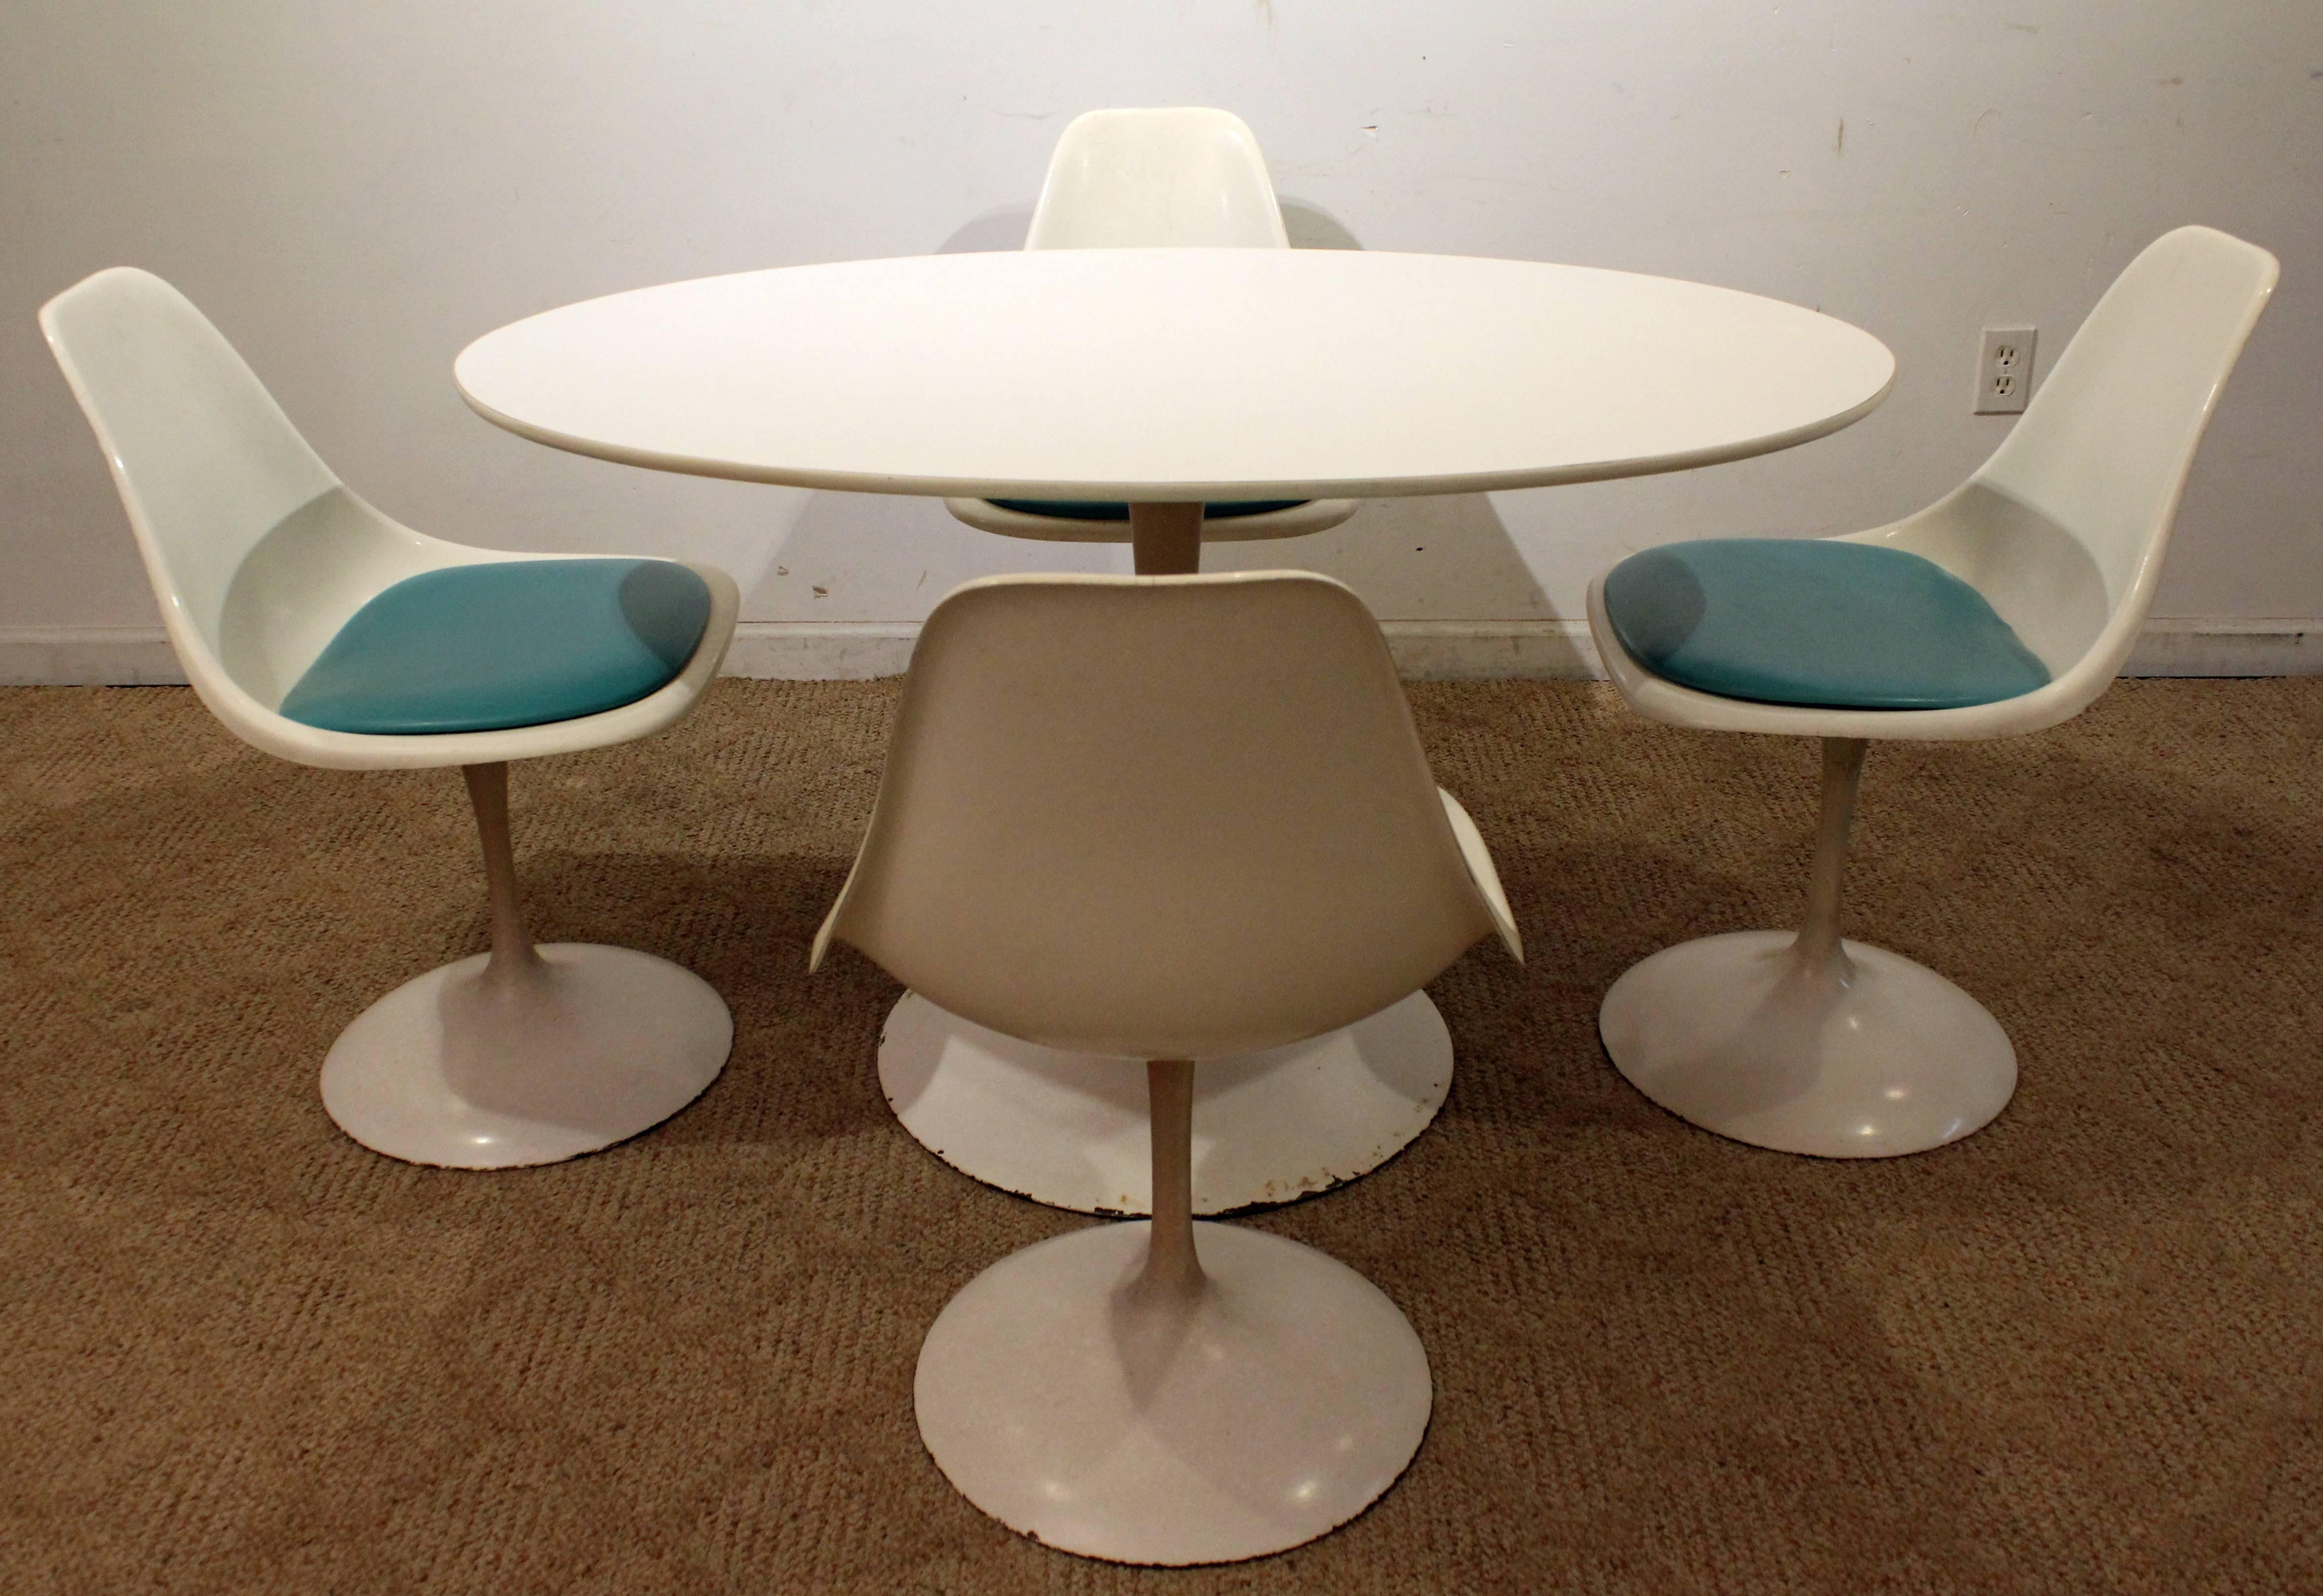 Offered is a Saarinen style dining set, including a tulip dining table and set of four tulip chairs. They are similar to the style of Eero Saarinen's Tulip dining set. Signed by Contemporary Shells Inc.

Measure: Table: 48